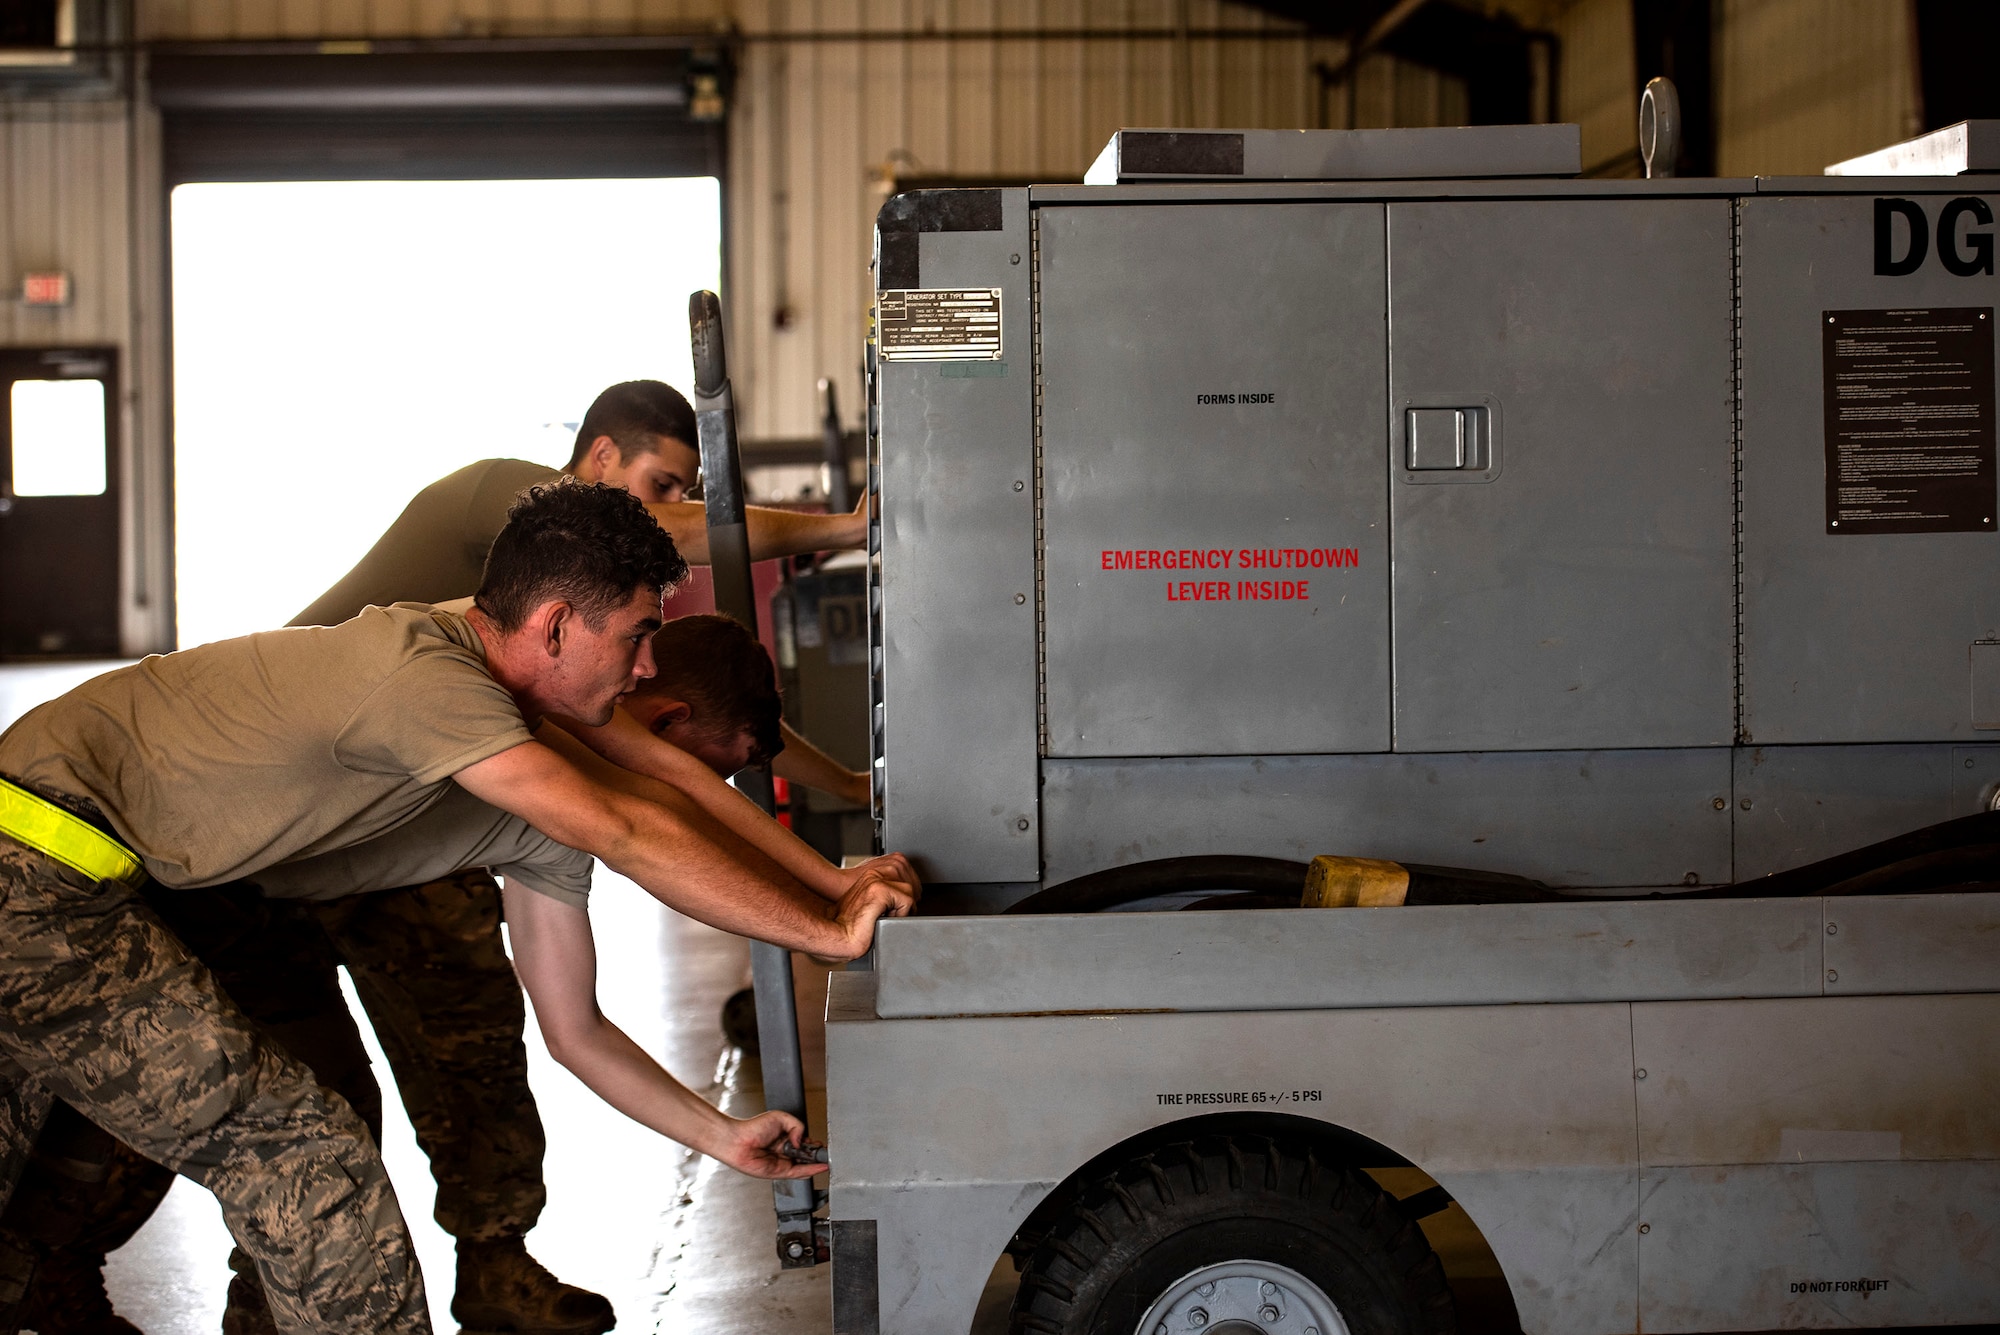 Aerospace ground equipment (AGE) Airmen from the 23d Maintenance Squadron push a generator, June 21, 2019, at Moody Air Force Base, Ga. AGE maintains the equipment needed to repair the three airframes in the 23d Wing. To accomplish this, AGE is broken down into three main functions: inspections, maintenance and dispatch. (U.S. Air Force photo by Senior Airman Erick Requadt)